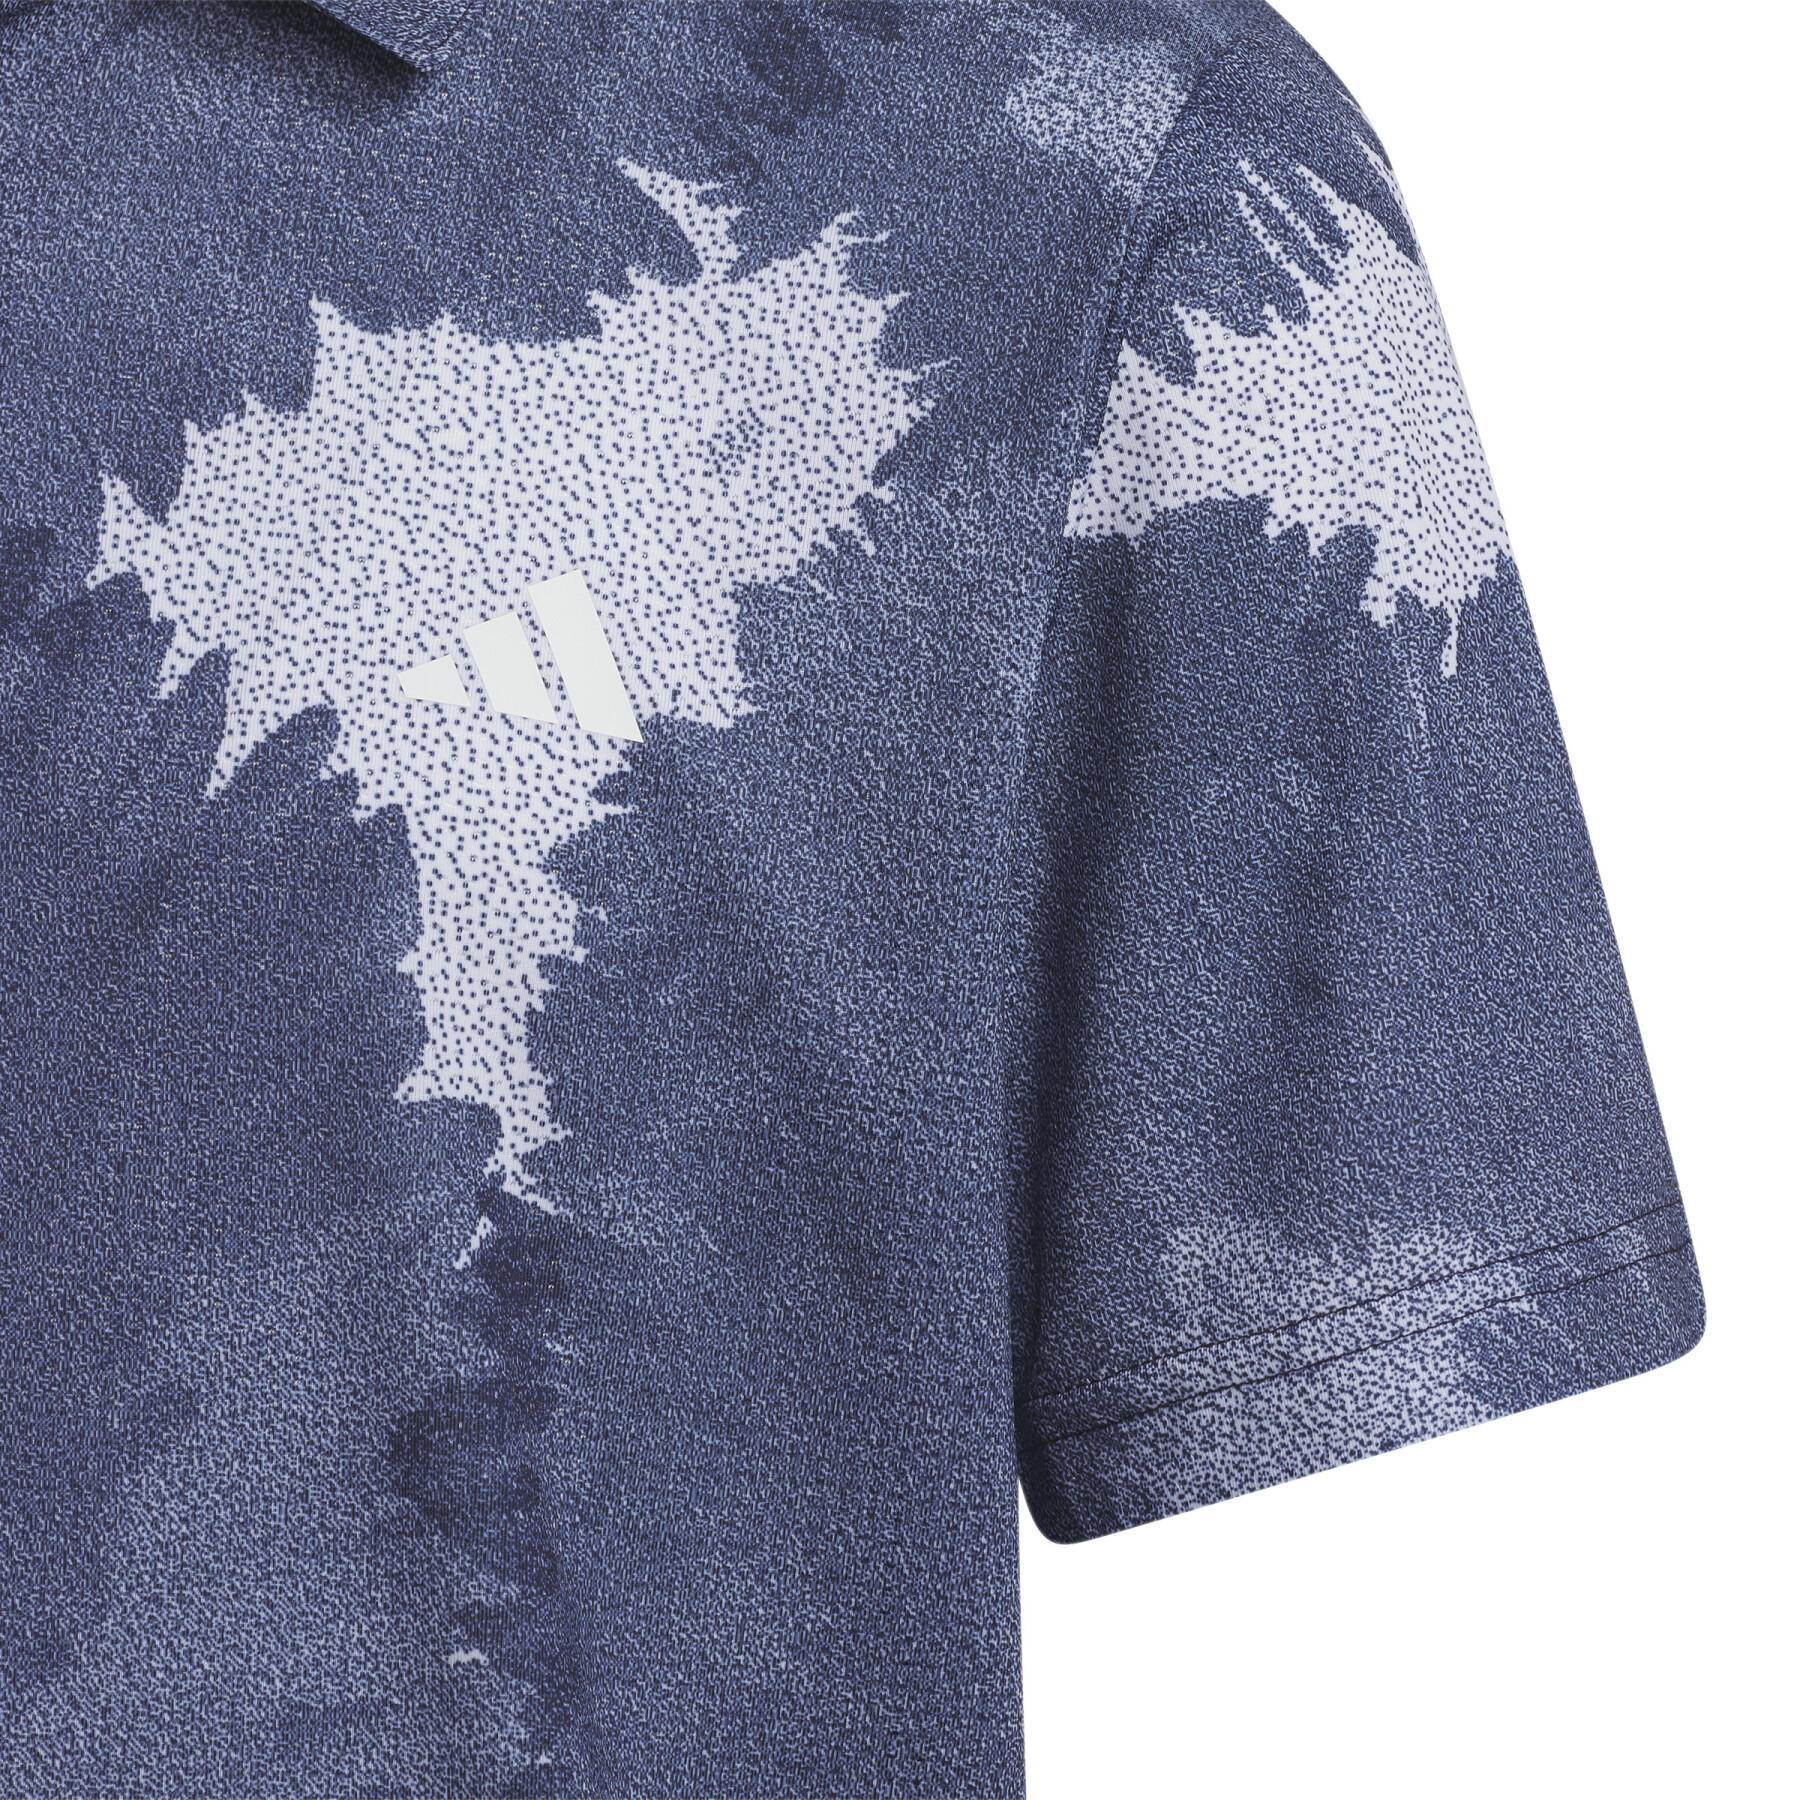 Children's floral knitted polo shirt adidas